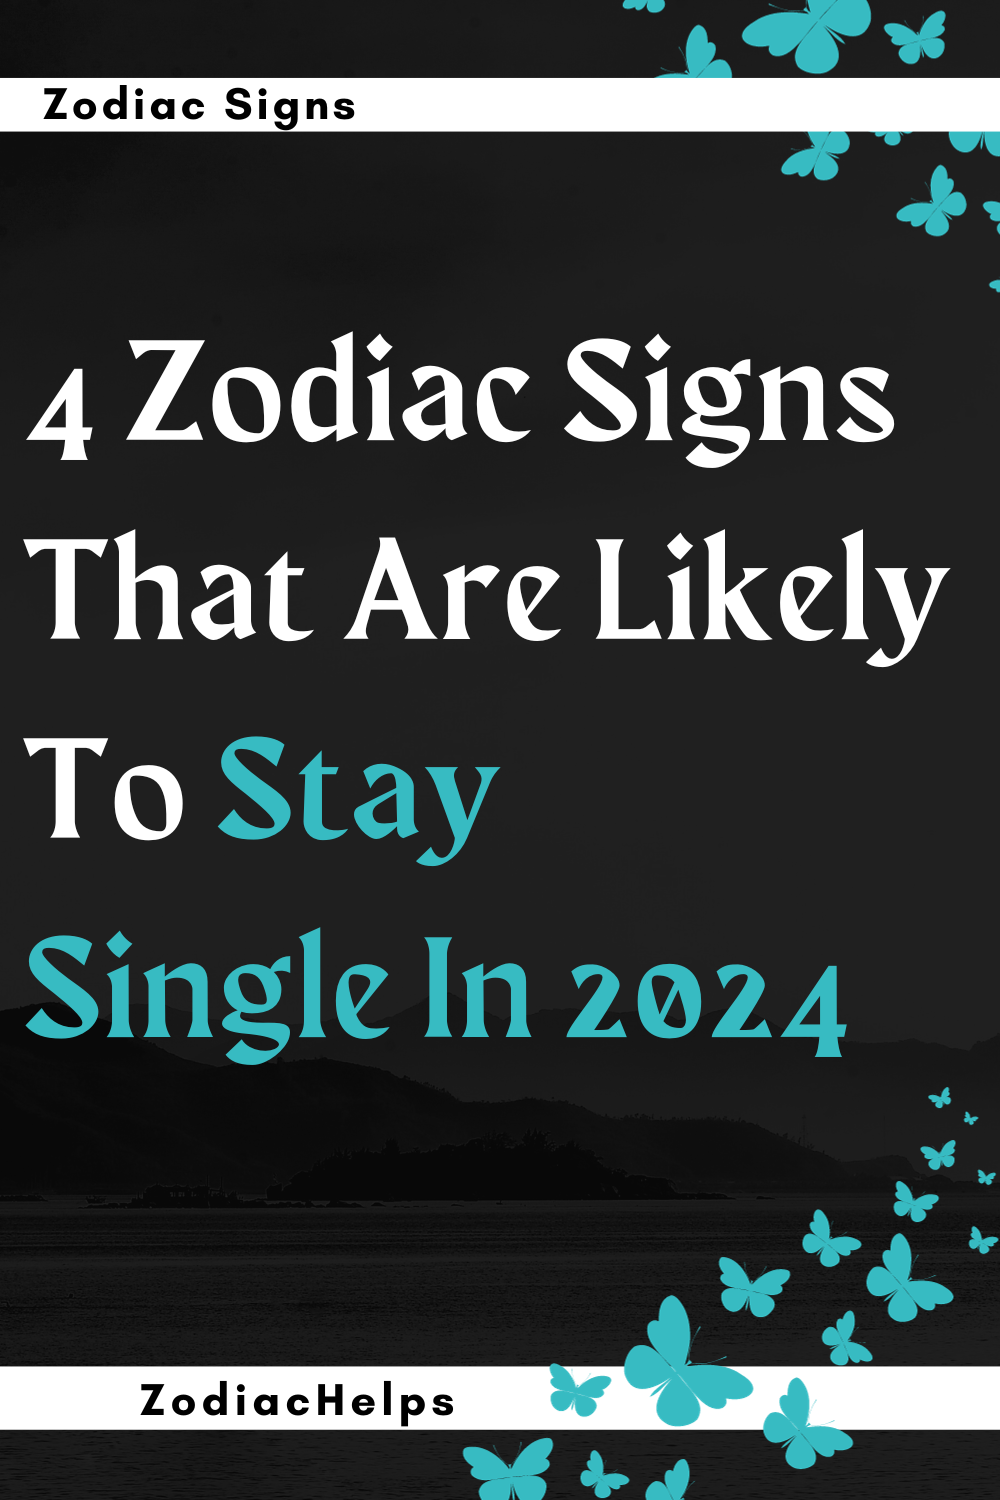 4 Zodiac Signs That Are Likely To Stay Single In 2024